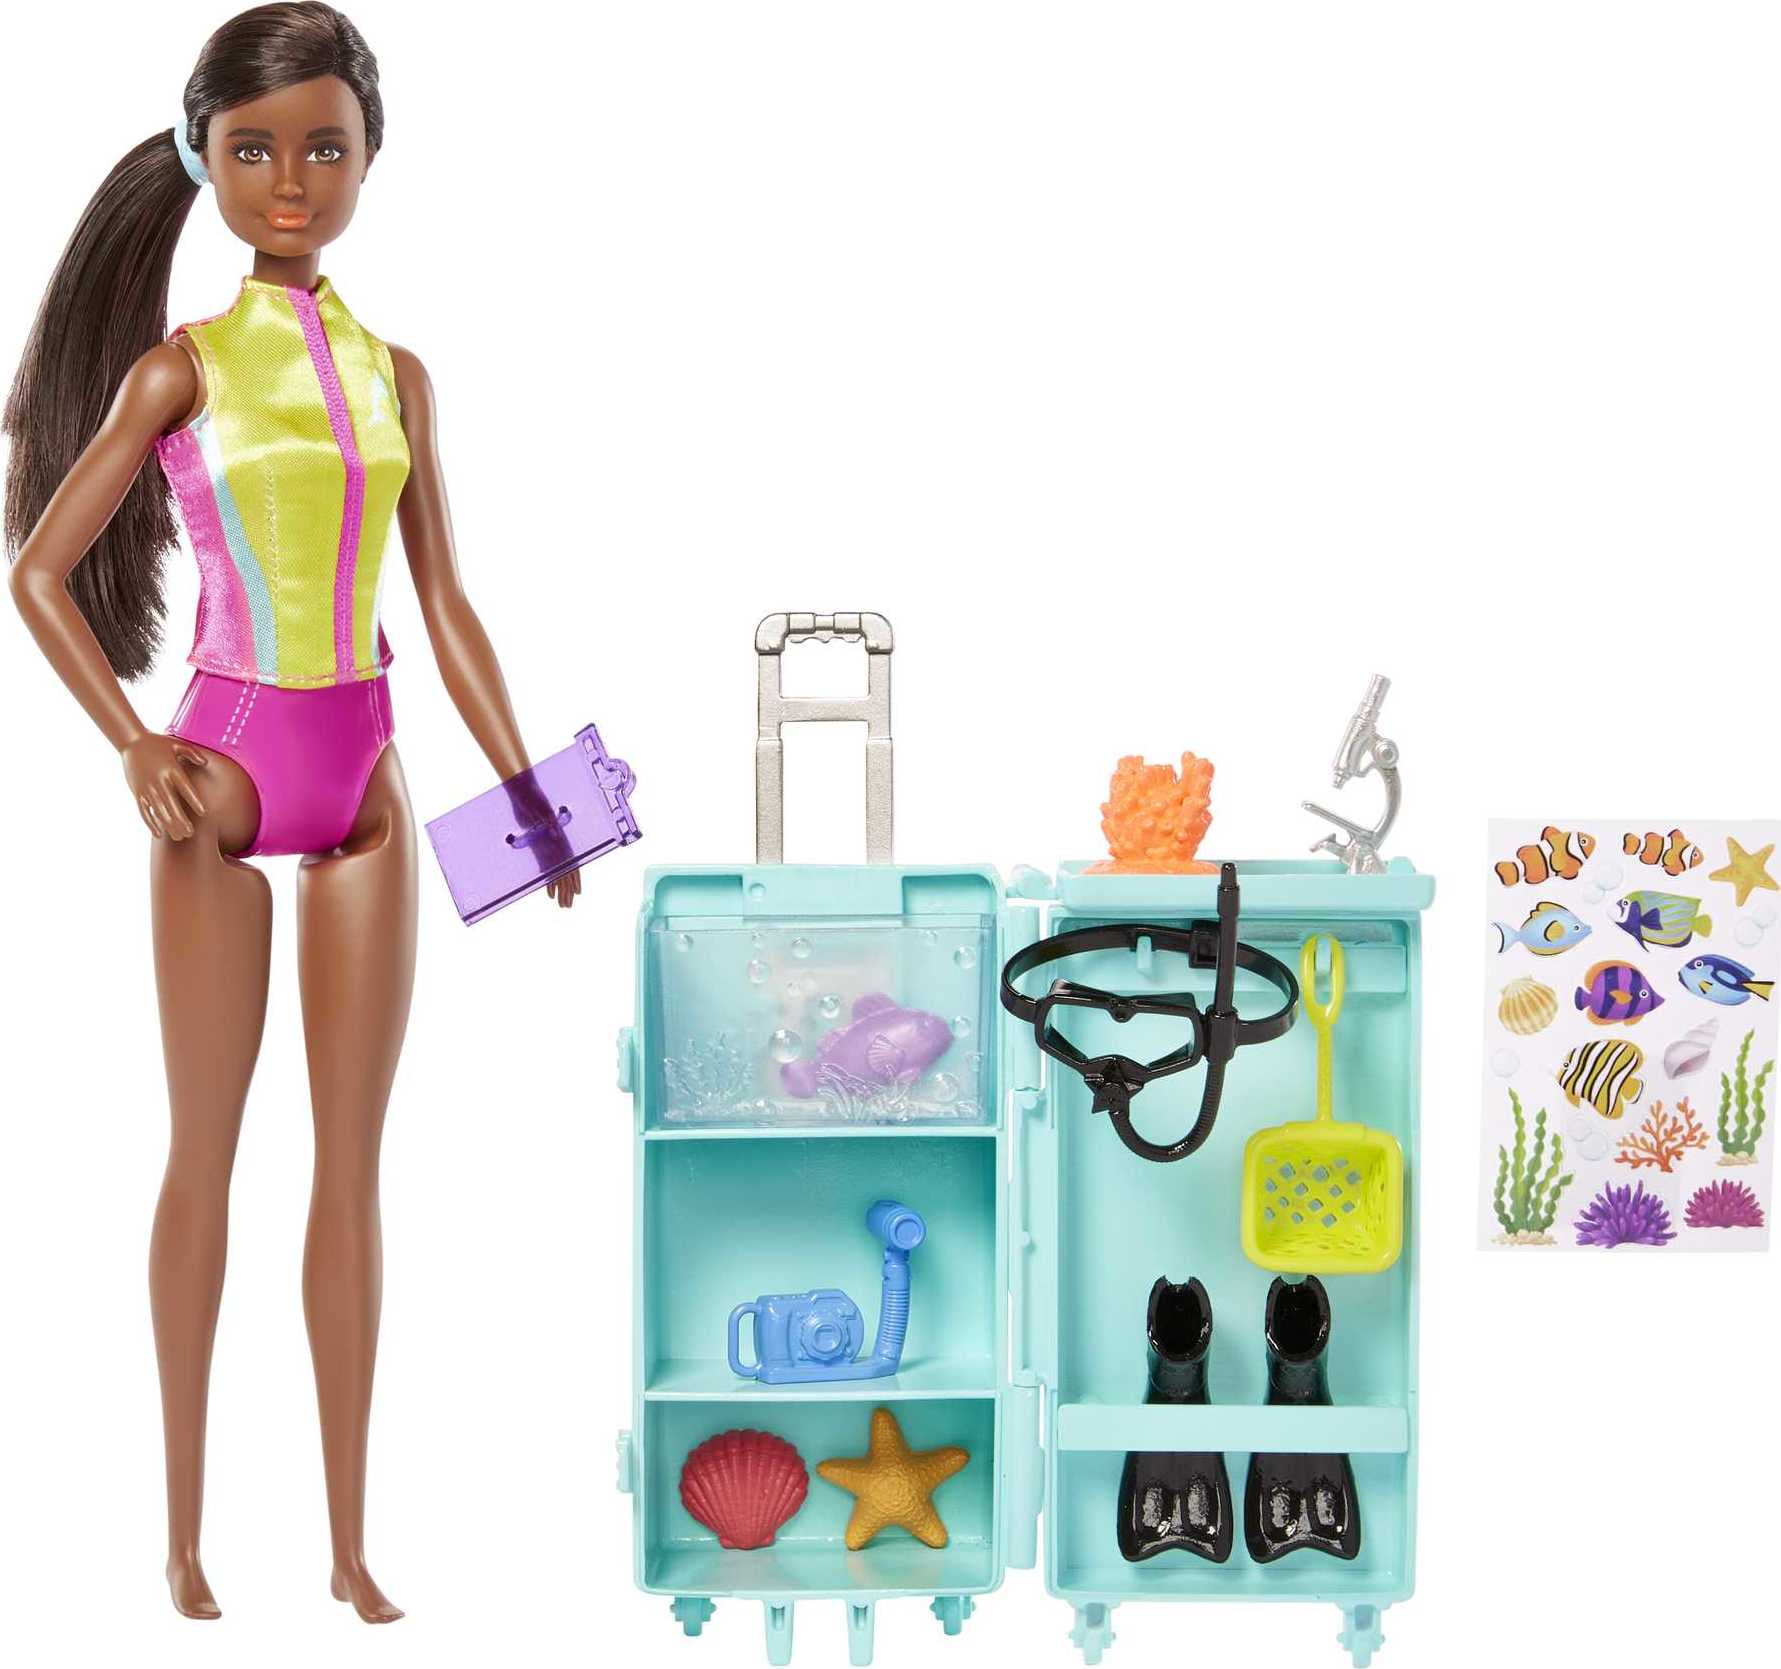 19 simple Ways to Store Barbies (for dolls & accessories) - Learn